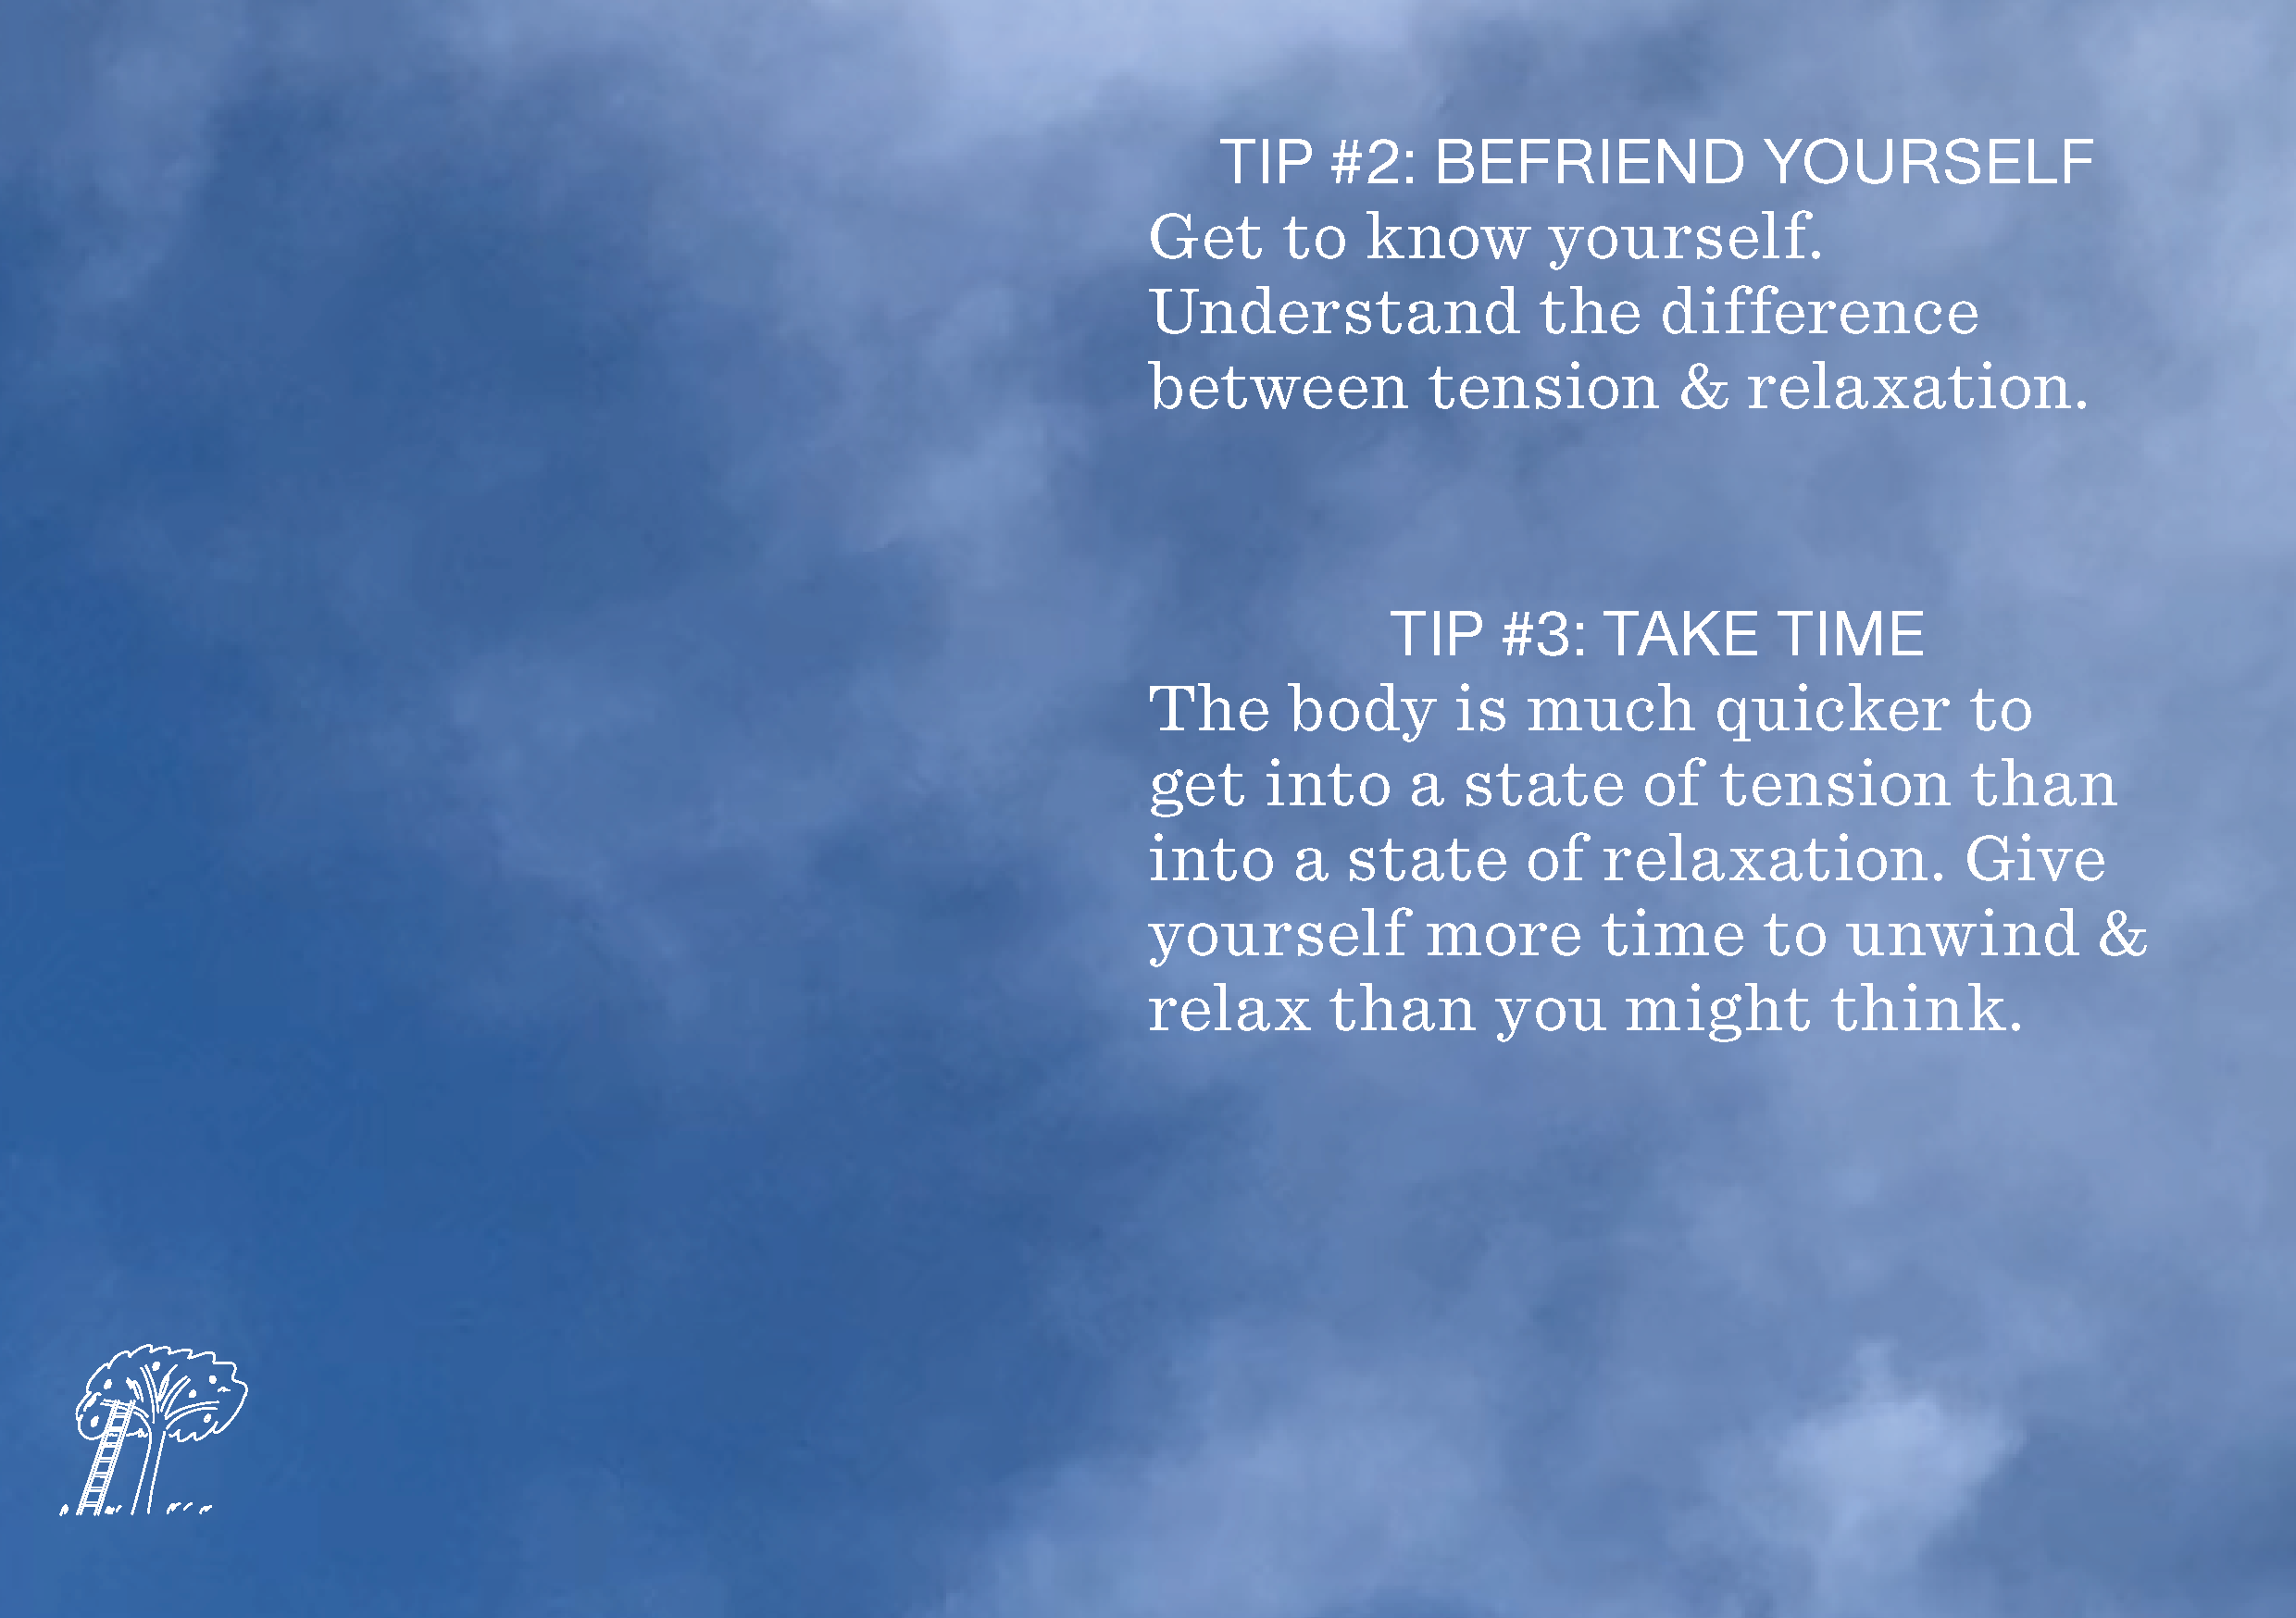 Image of sky with Tip #2 and #3 written in white writing